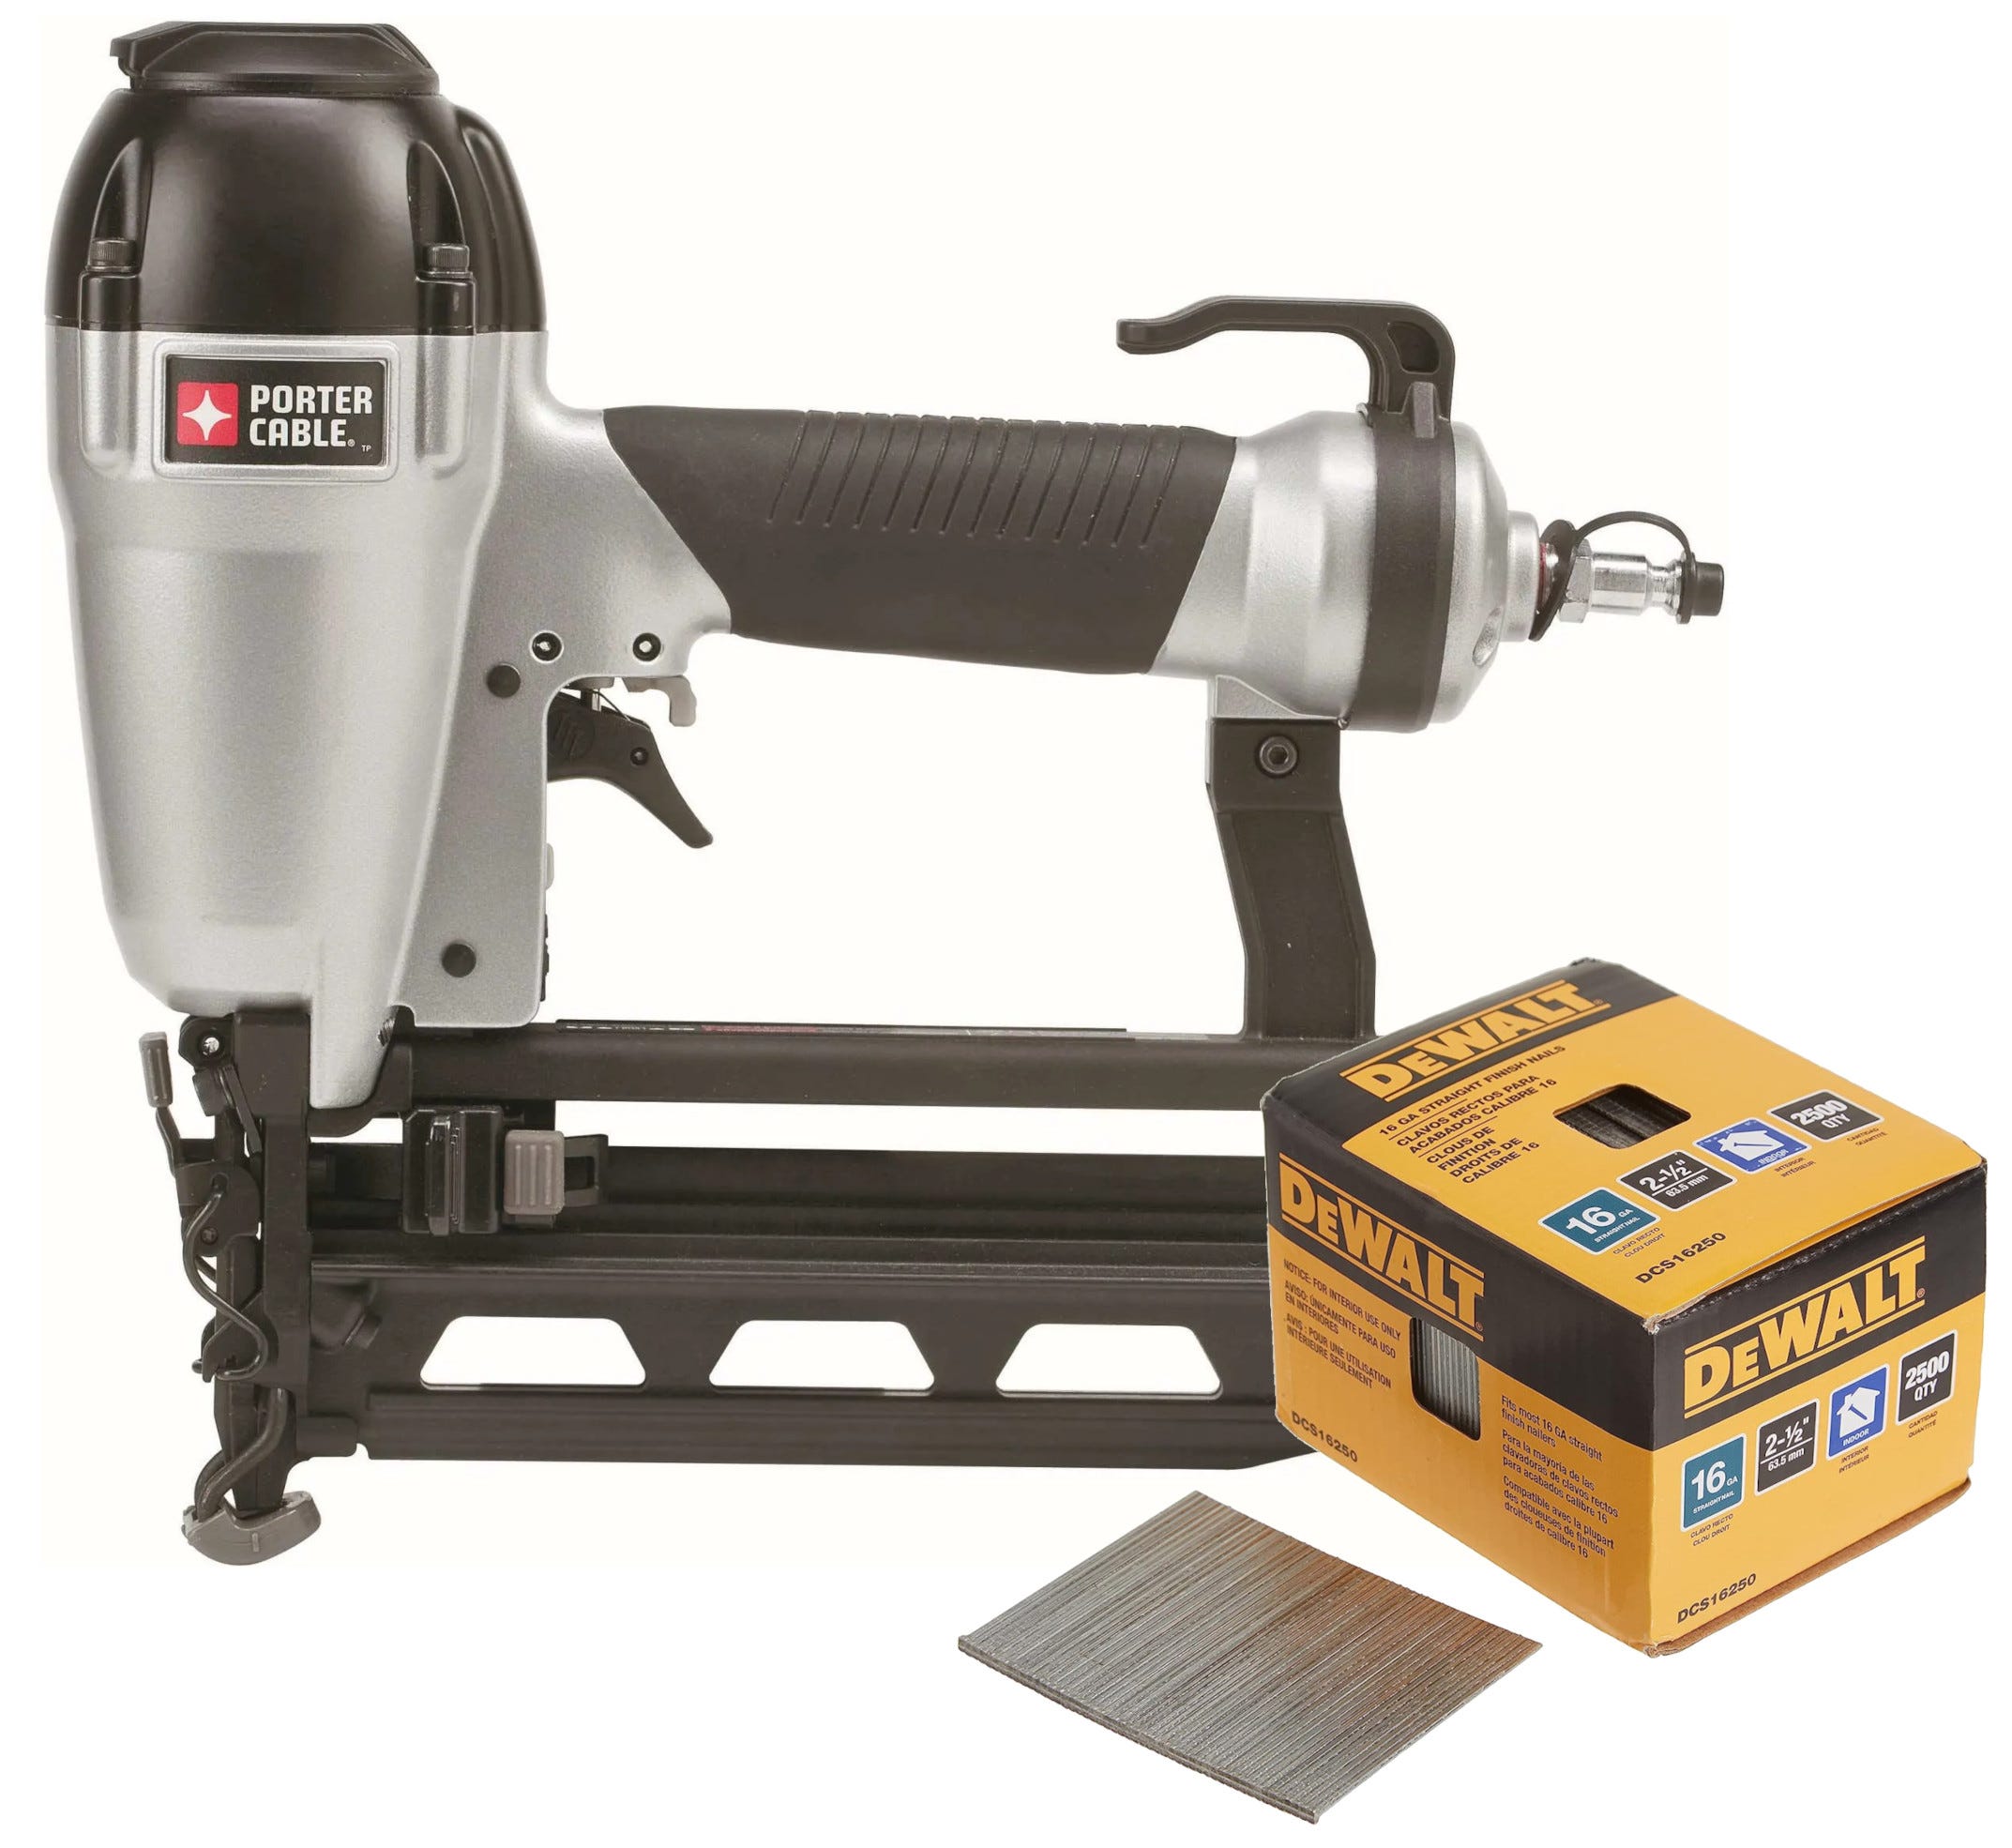 Porter Cable 16 Gauge 2-1/2 Finish Nailer Kit With 16 Gauge, 41% OFF